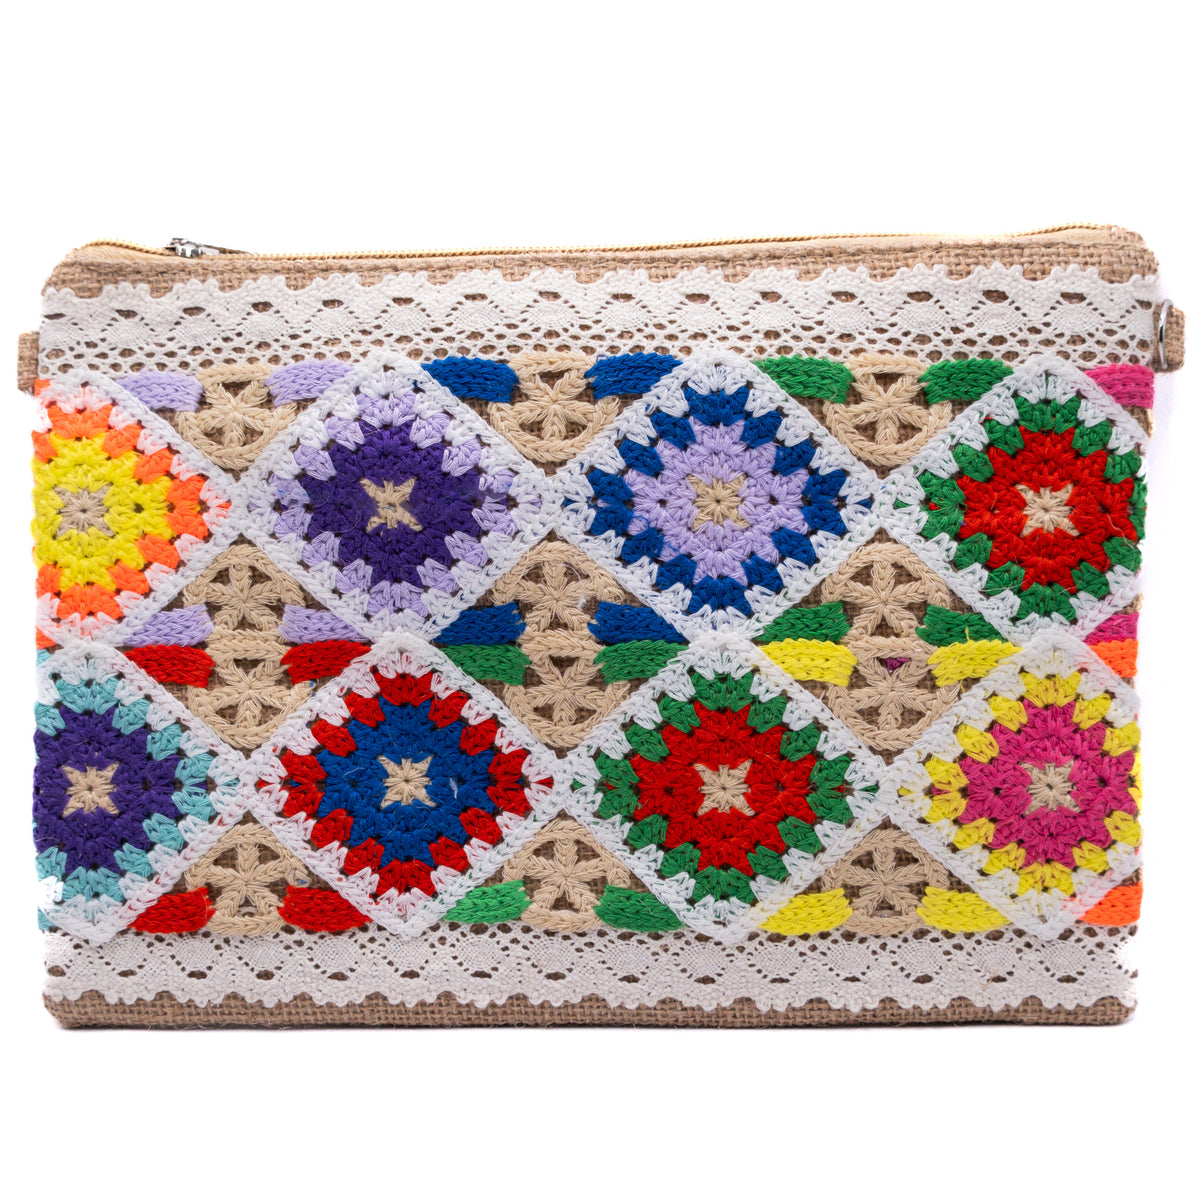 The Cayman Clutch Bags